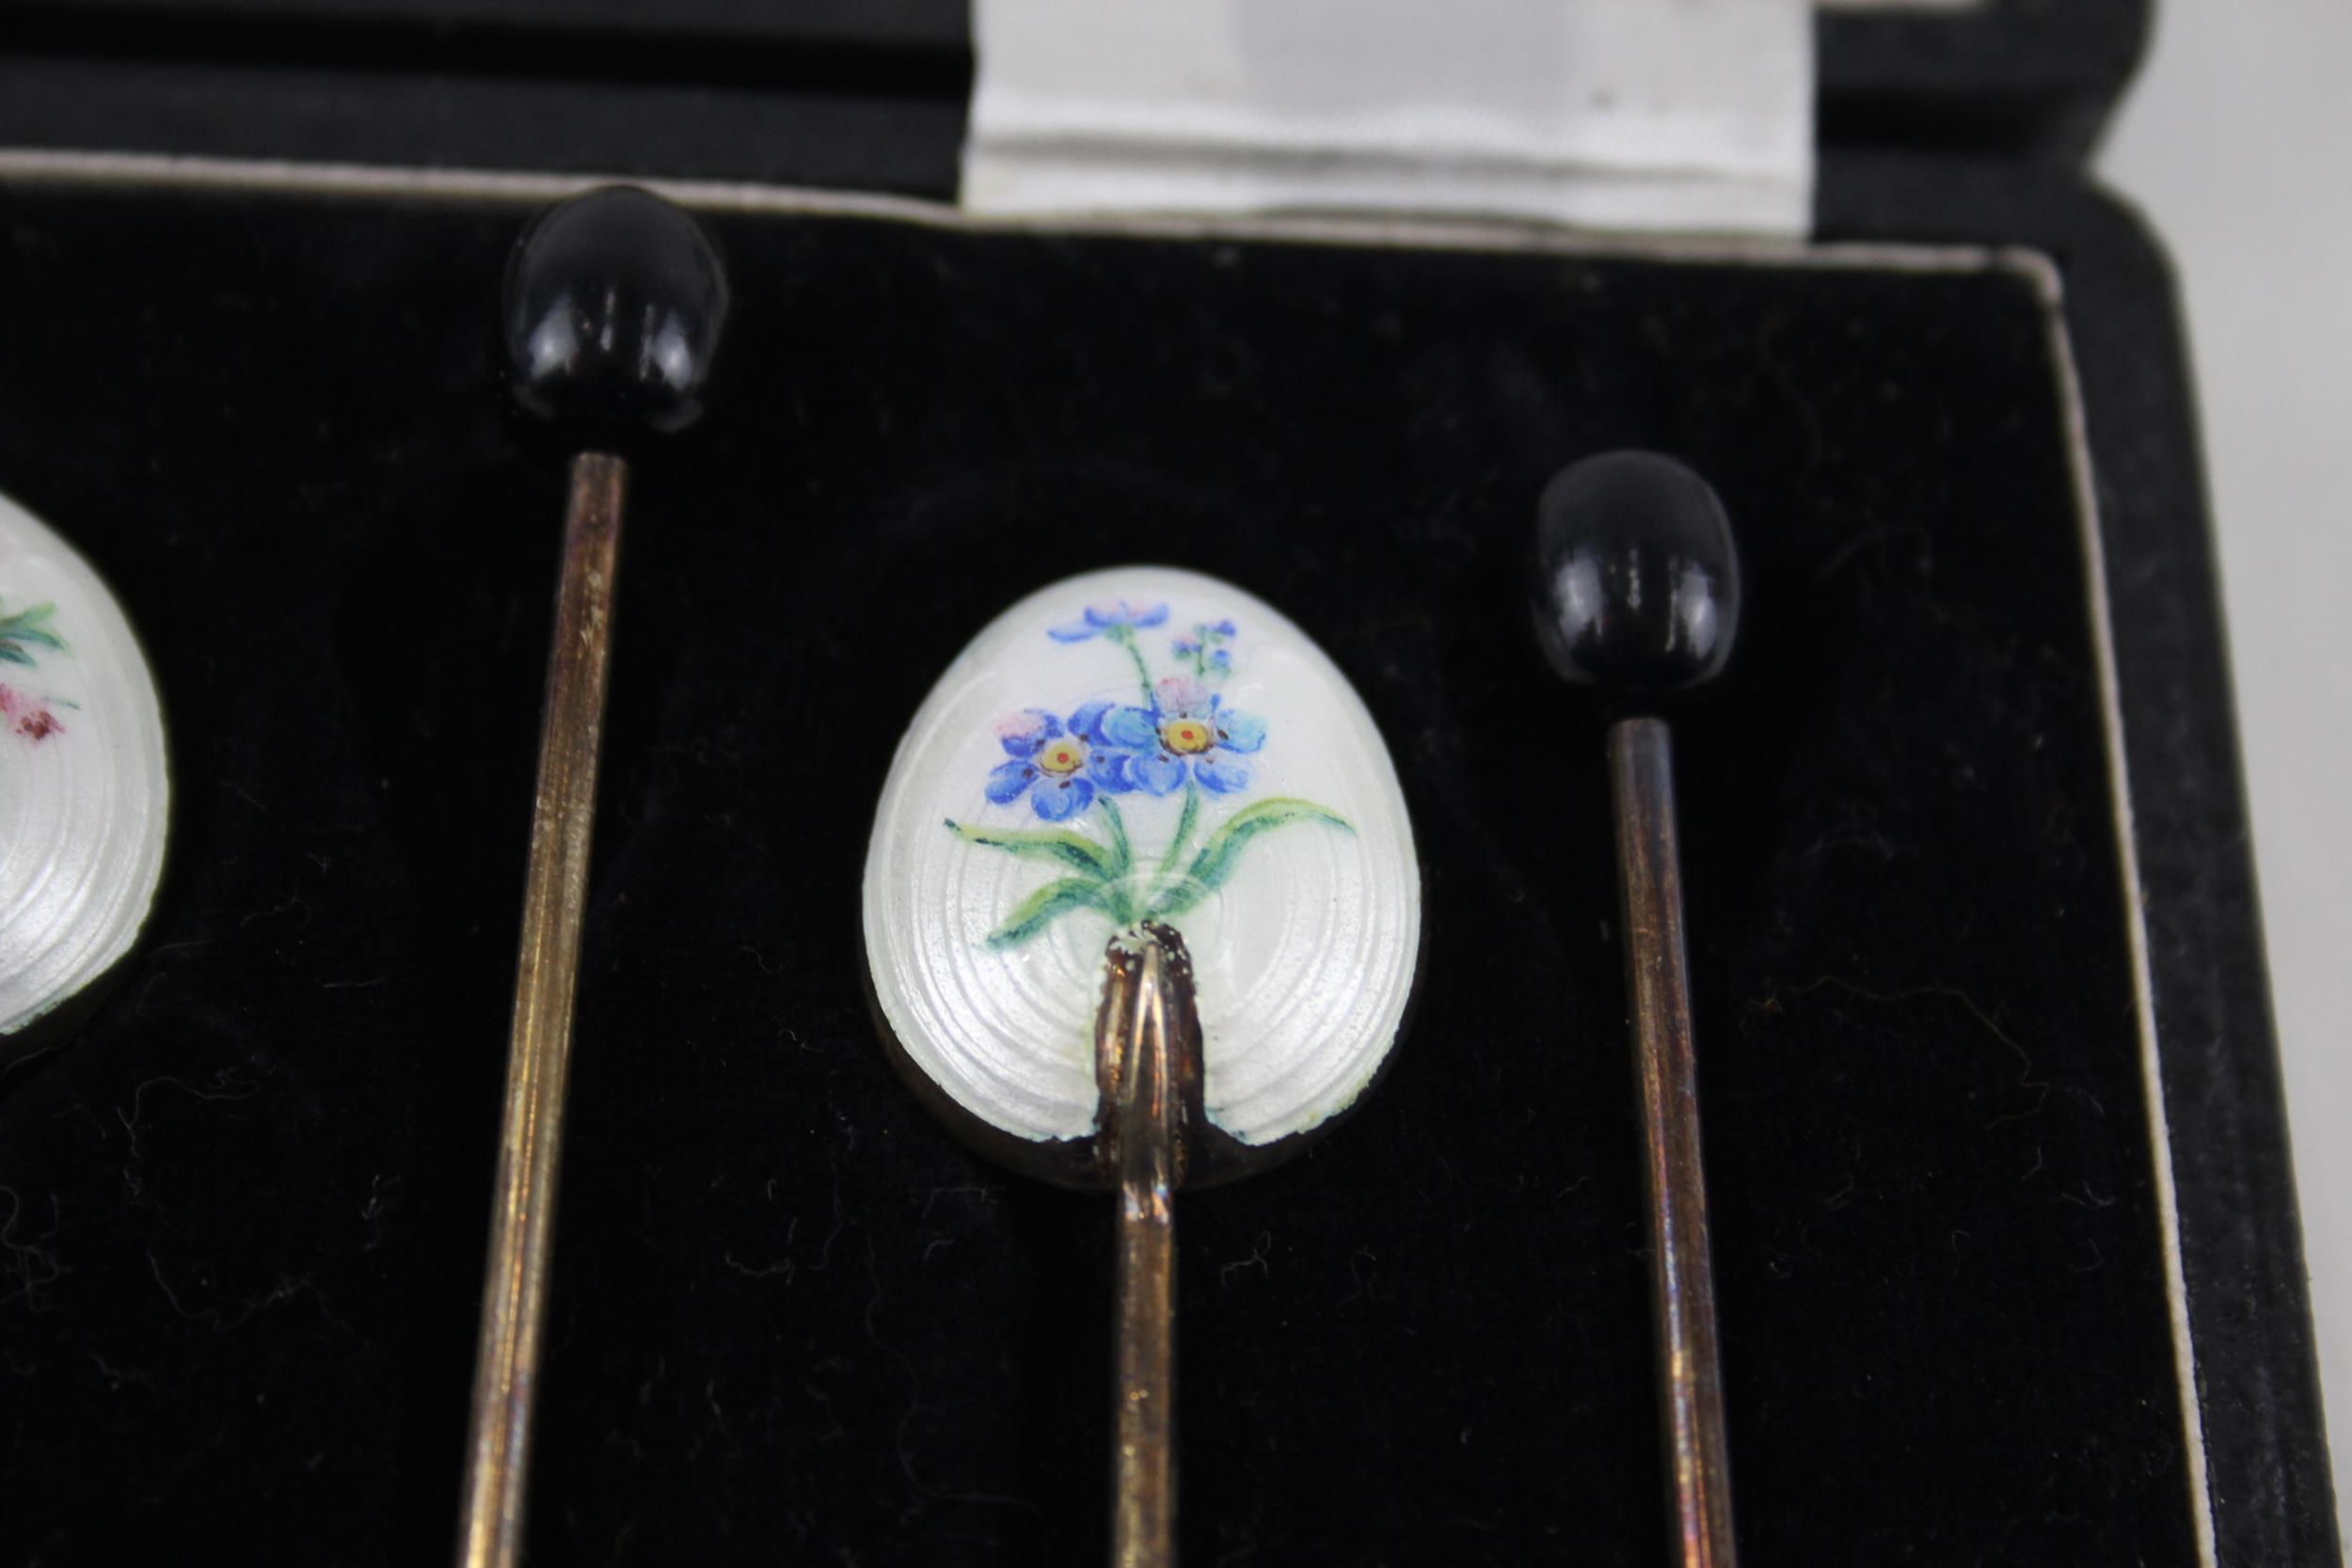 6 x Vintage 1954 Birmingham Sterling Silver Guilloche Enamel Coffee Spoons (45g) - w/ Fitted Case, - Image 5 of 6